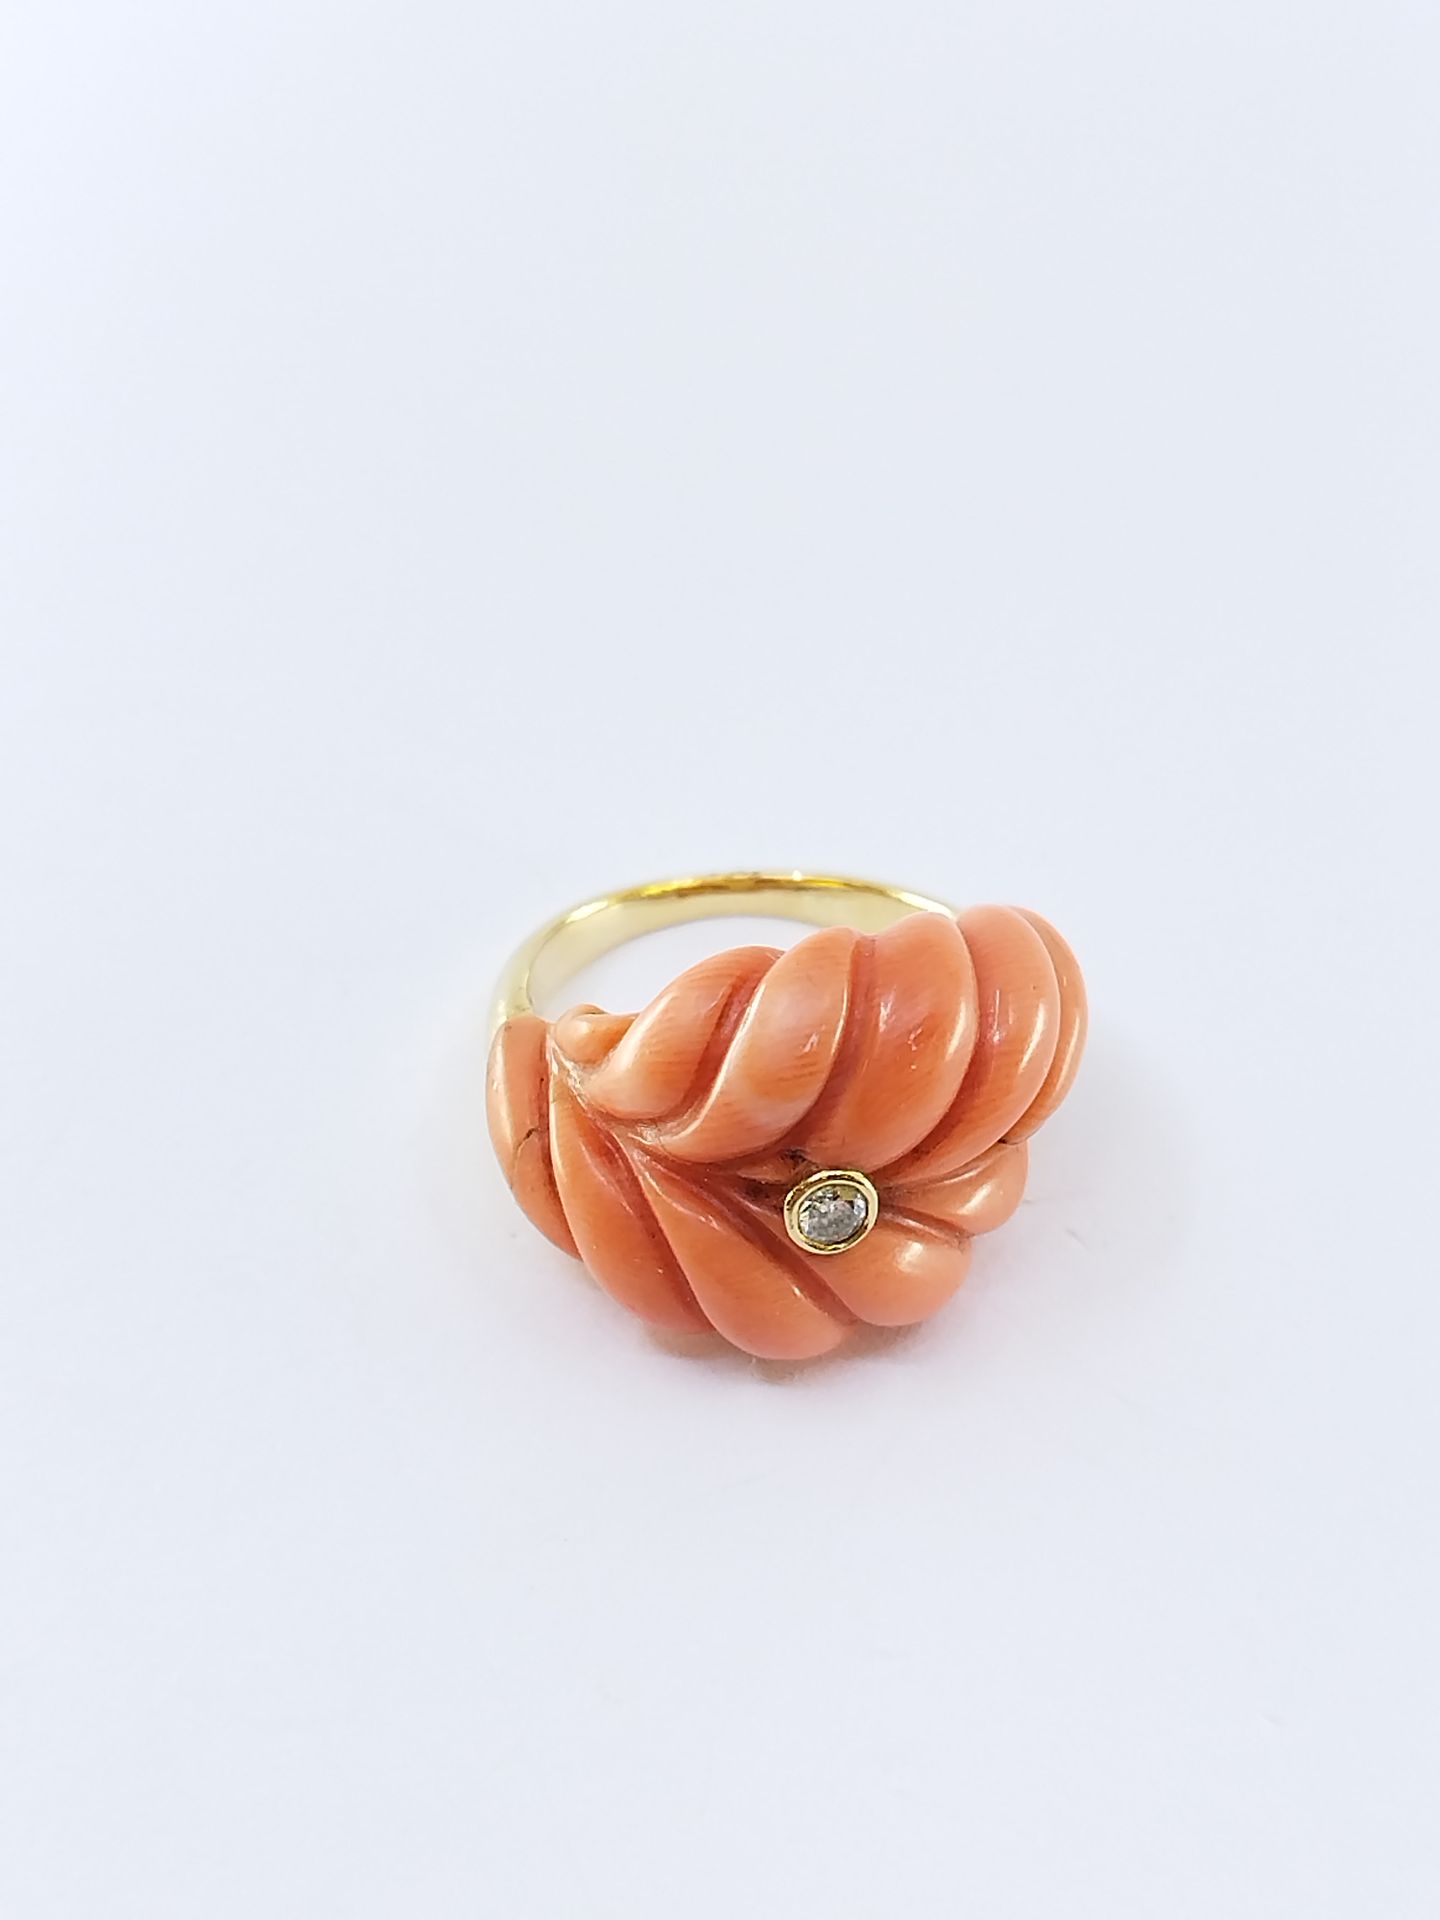 Null RING in yellow gold 750° decorated with an angel skin coral (cracked) punct&hellip;